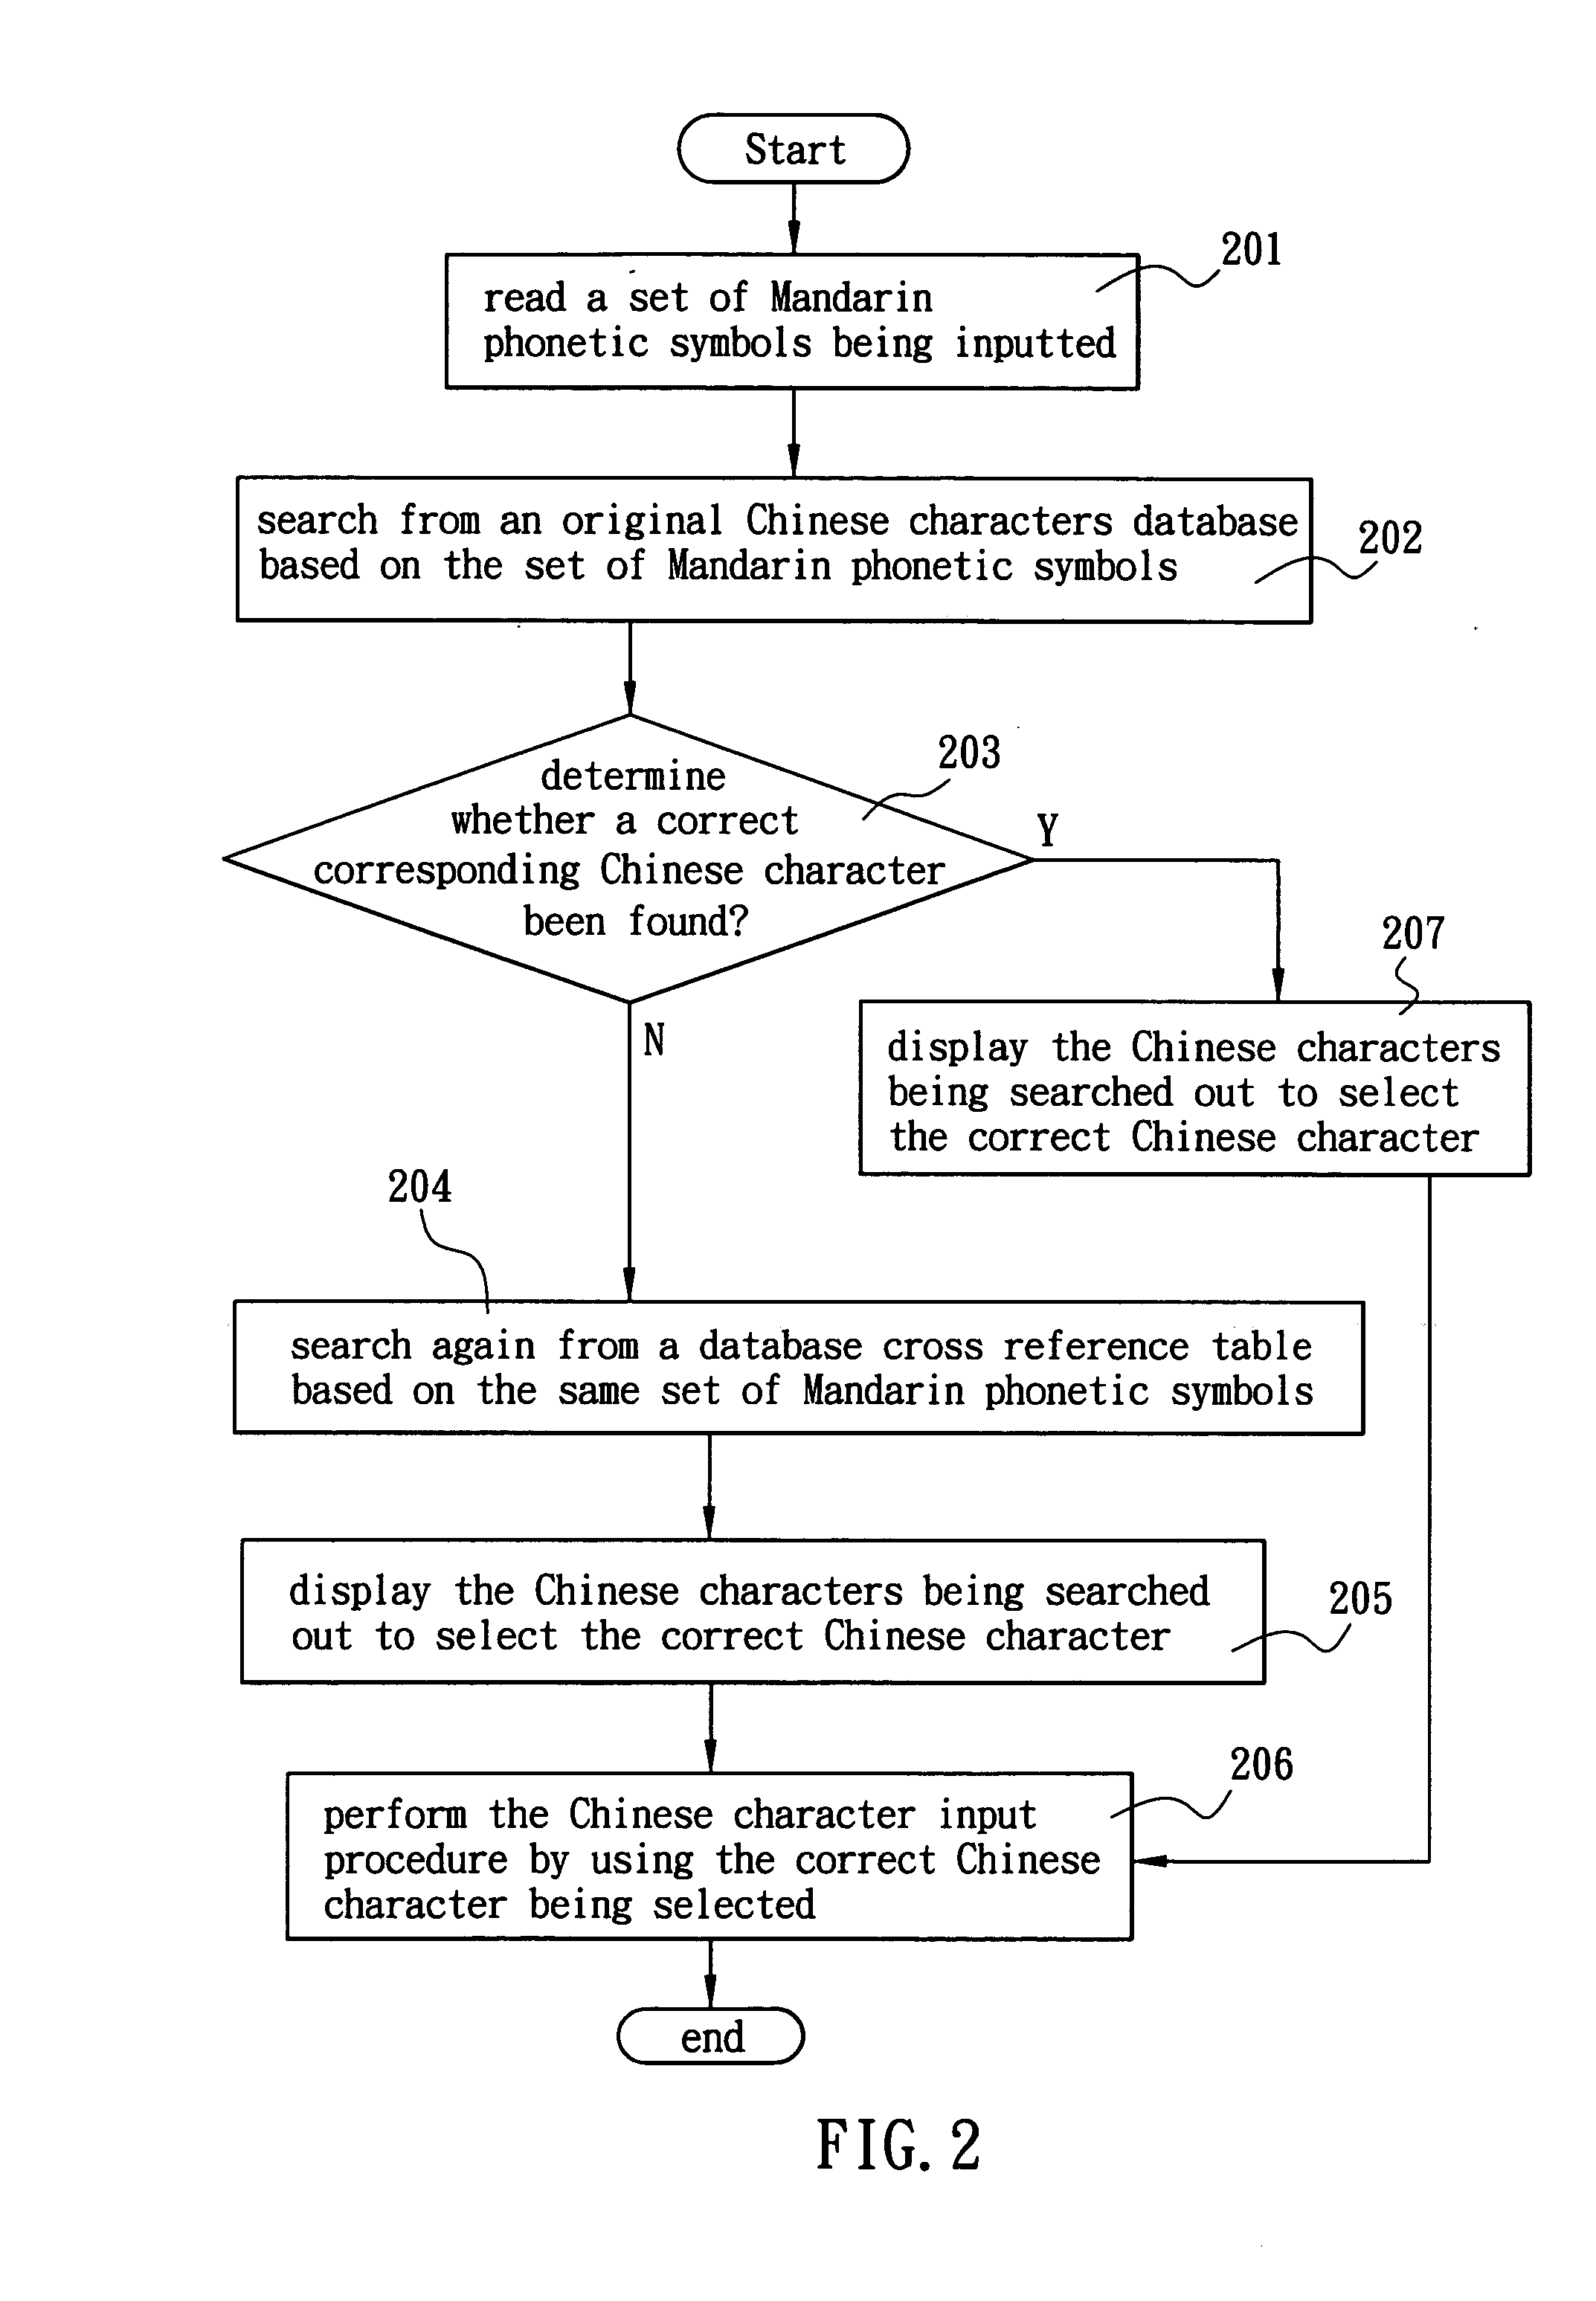 Method for implementing a fuzzy spelling while inputting Chinese characters into a mobile phone